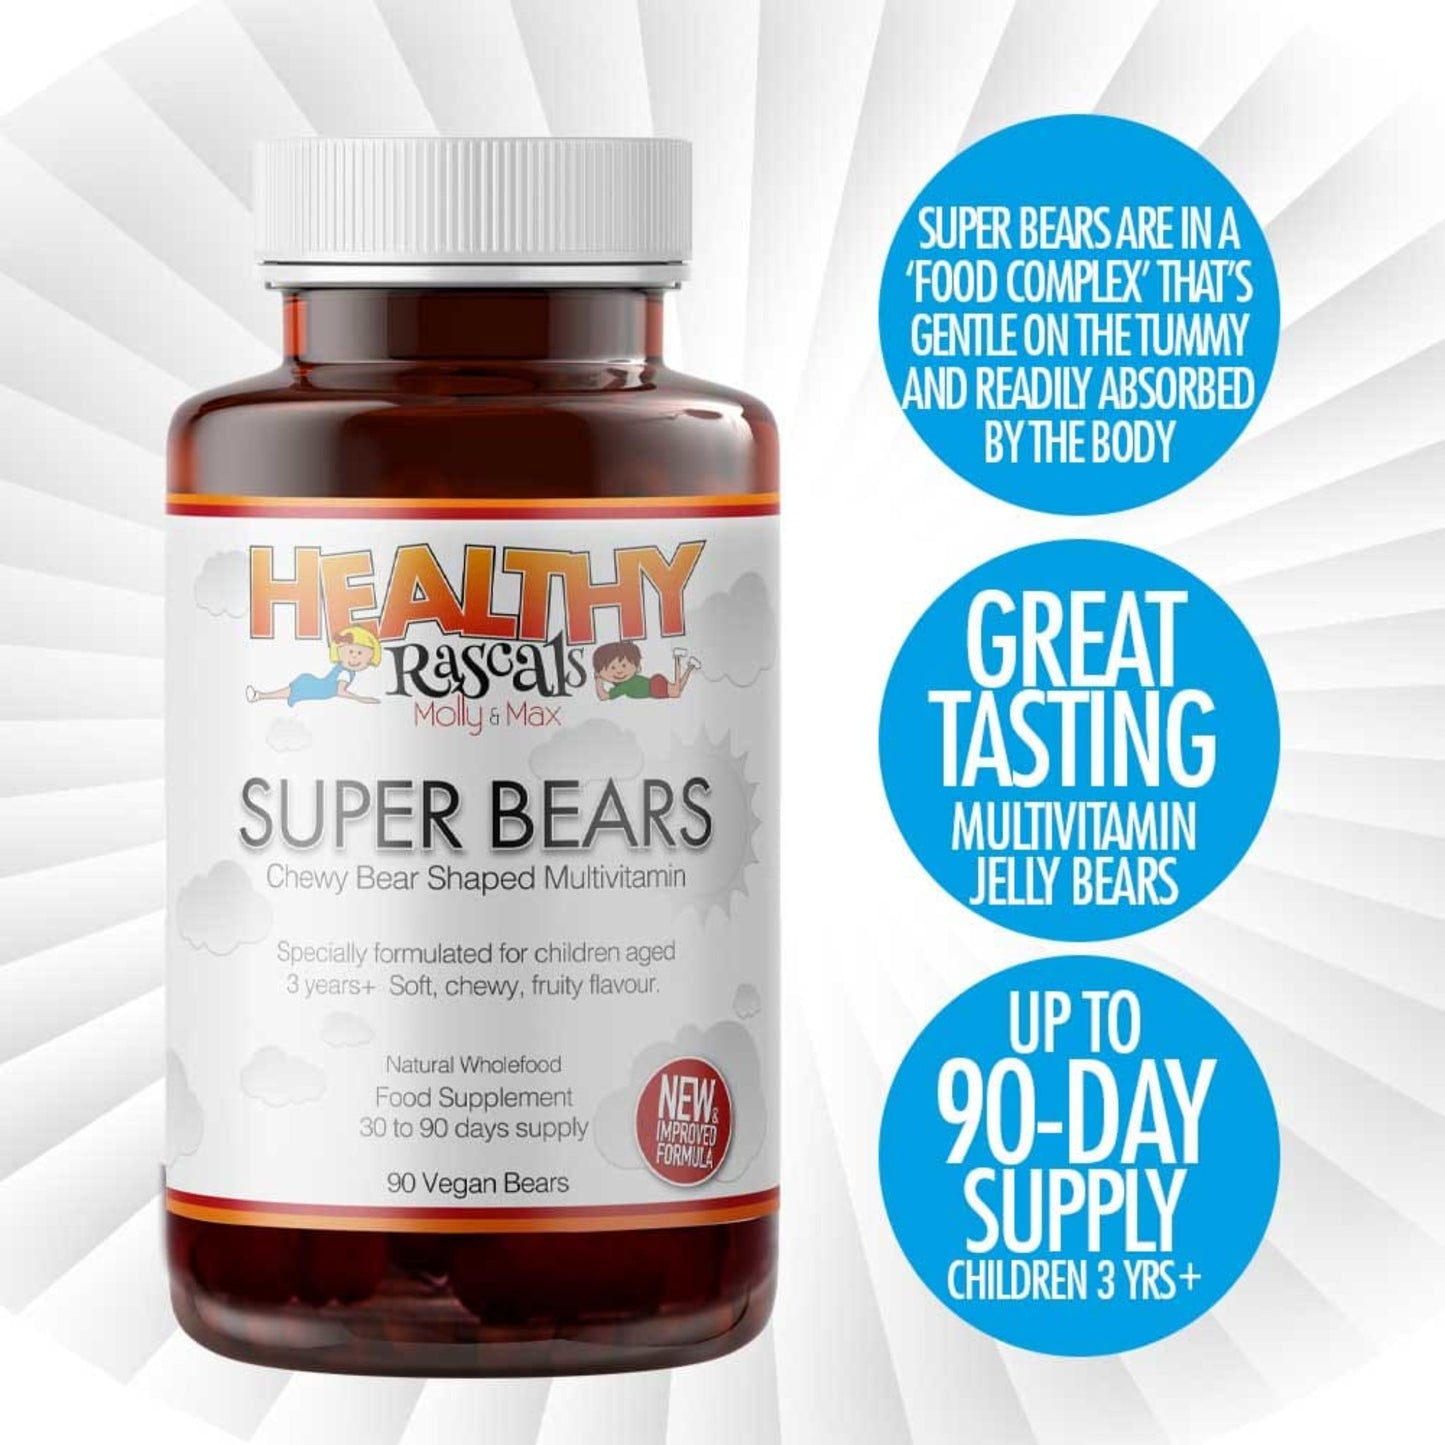 Super Bears are a great tasting multivitamin jelly bear suitable for children